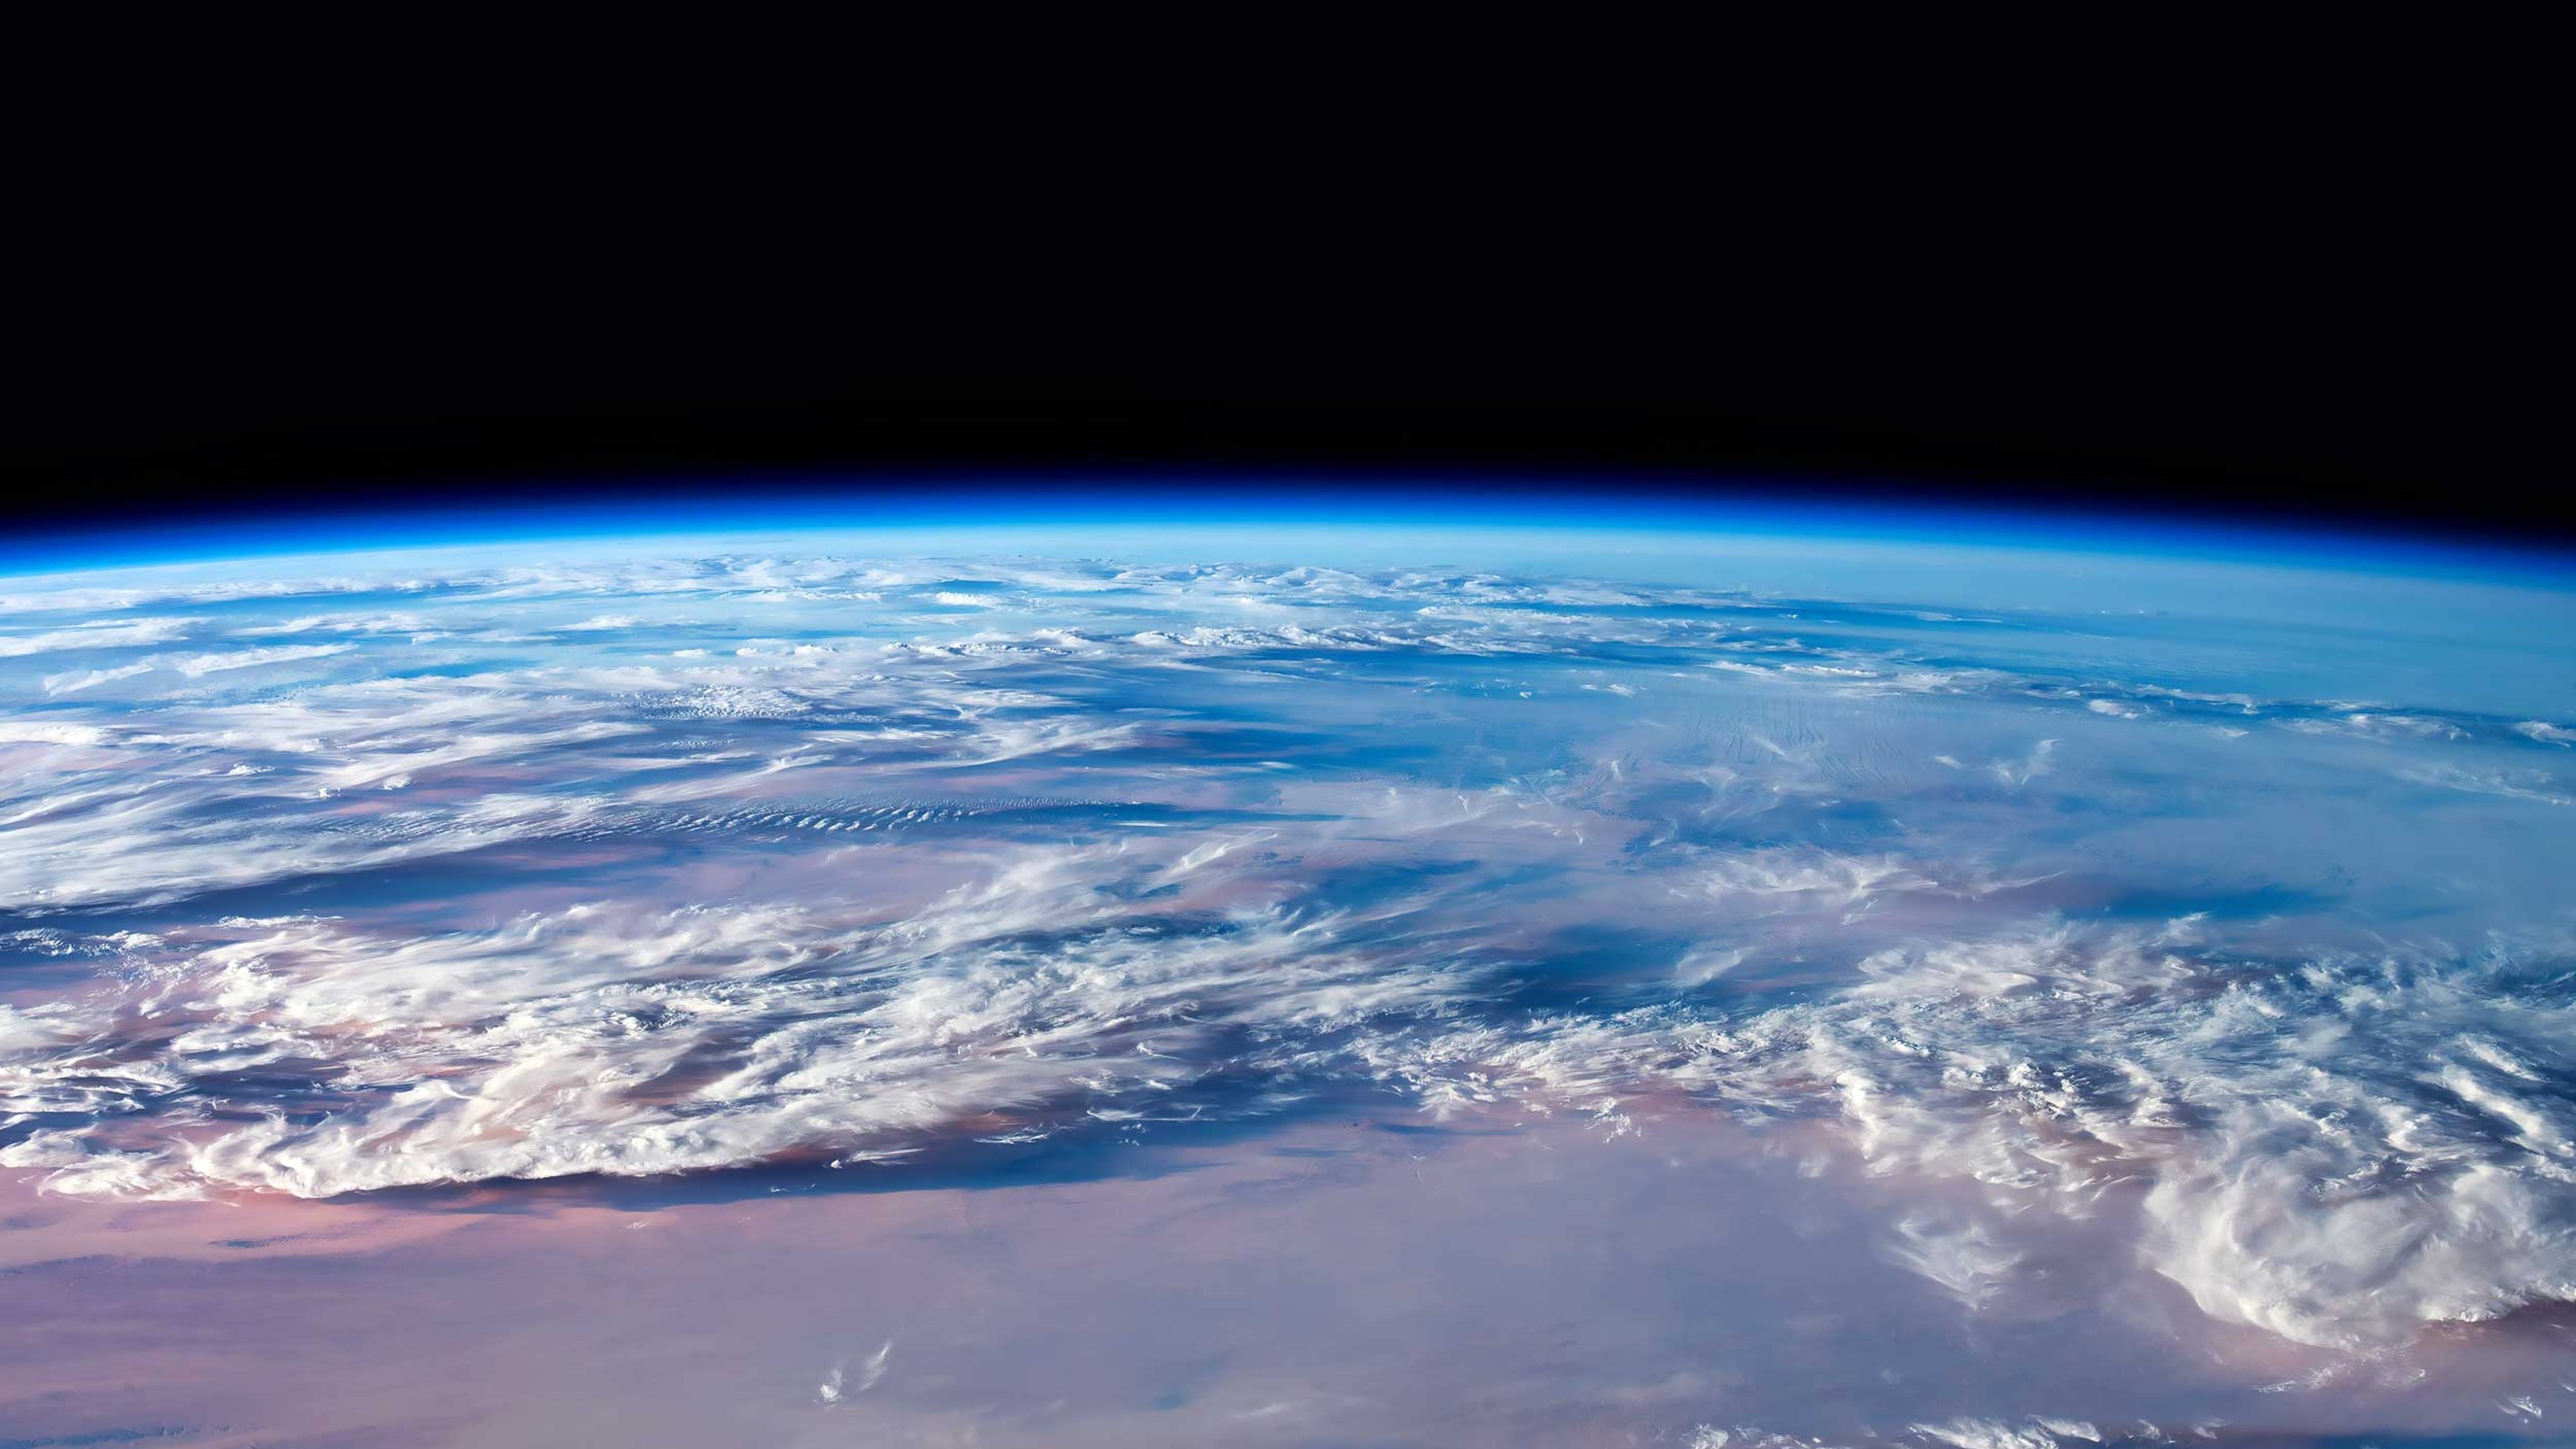 A partial view of the earth from space showing the curvature of the earth and the atmosphere filled with fluffy clouds.